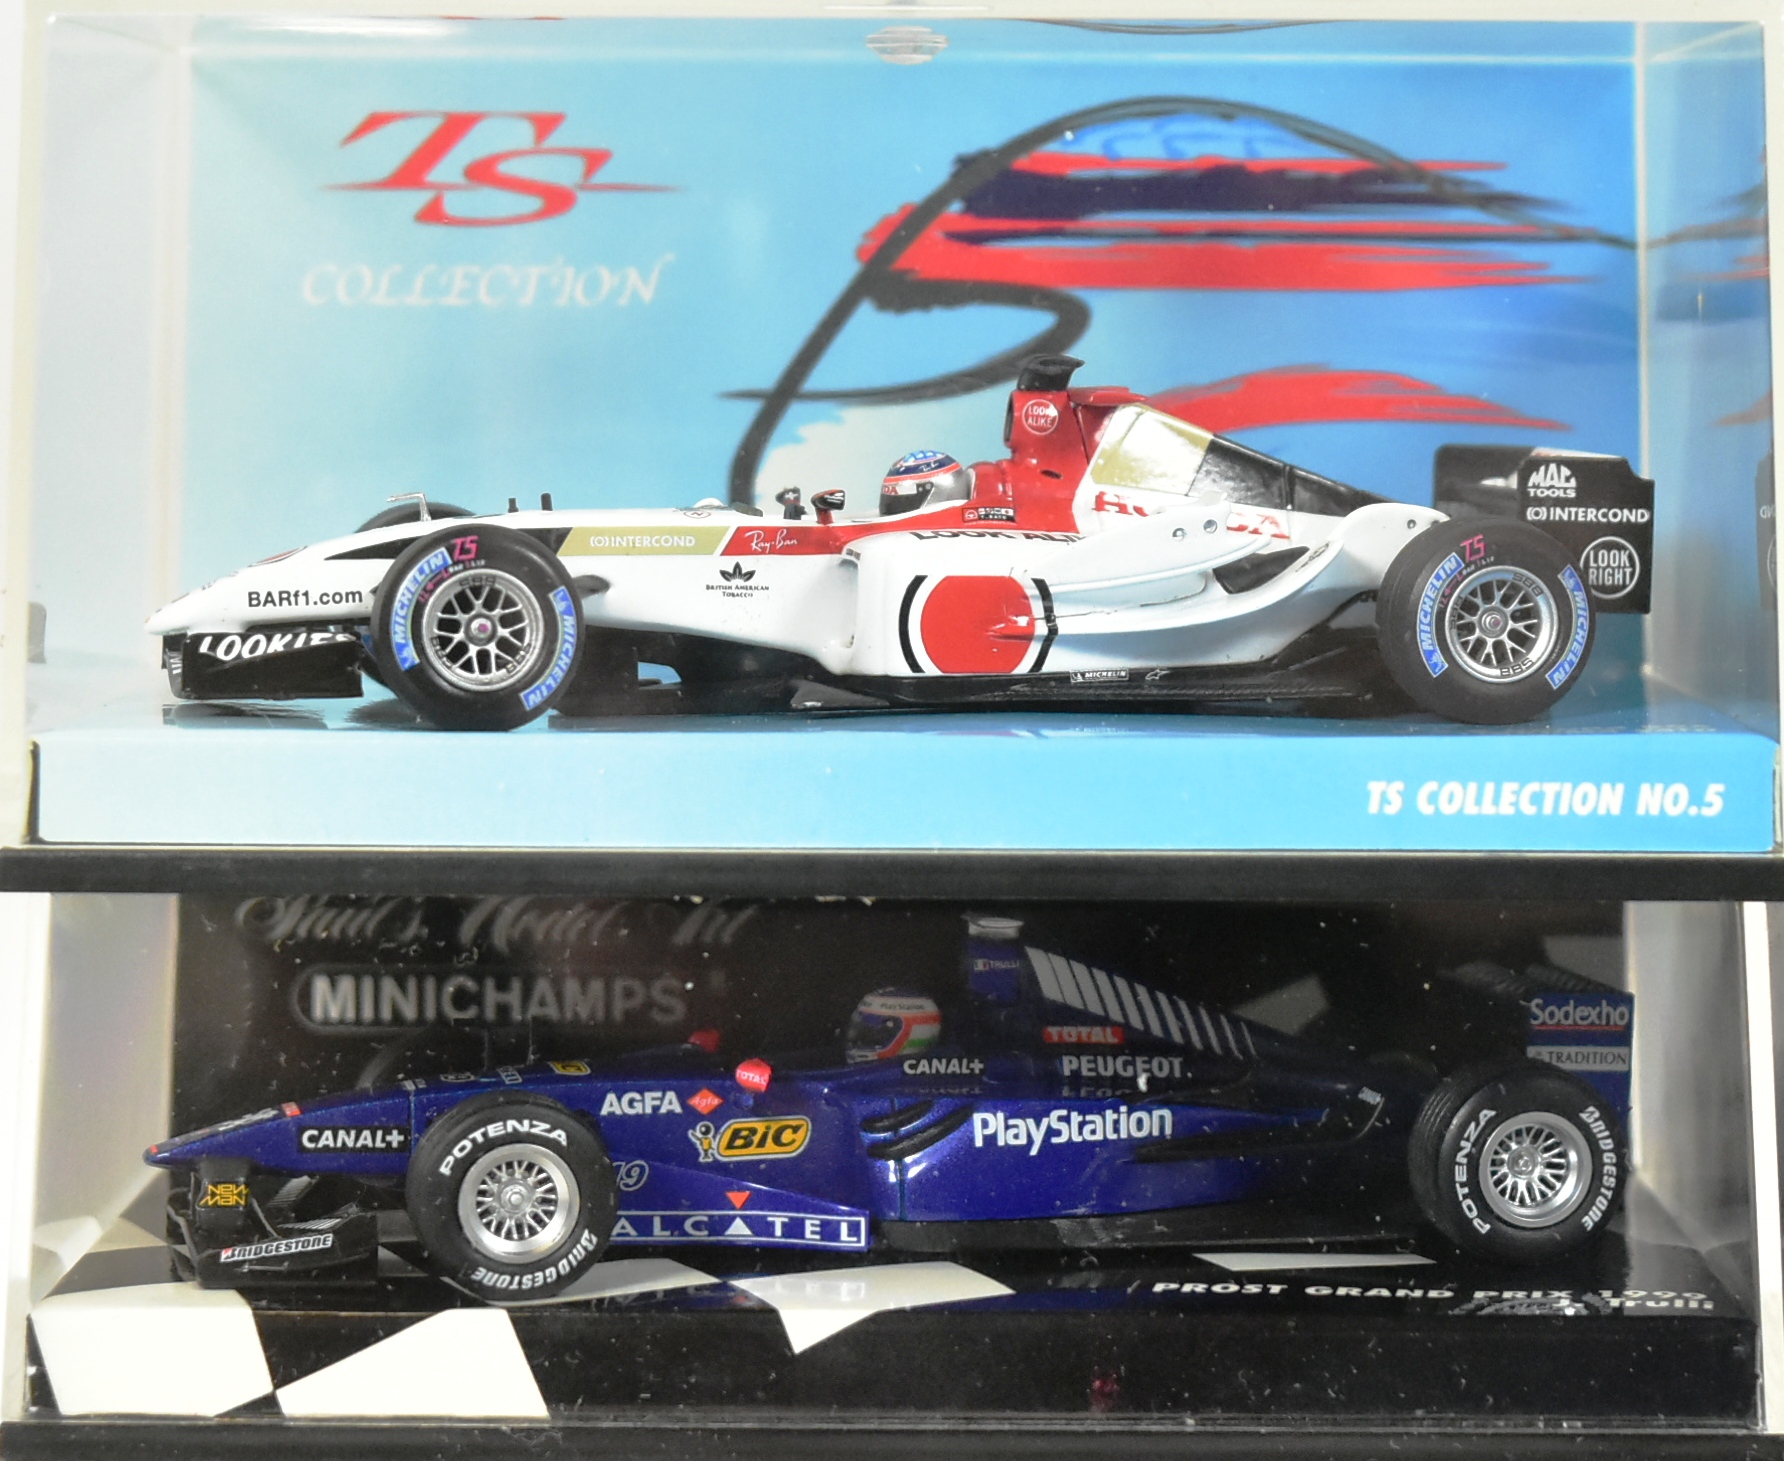 DIECAST - COLLECTION MINICHAMPS 1/43 SCALE - Image 5 of 5